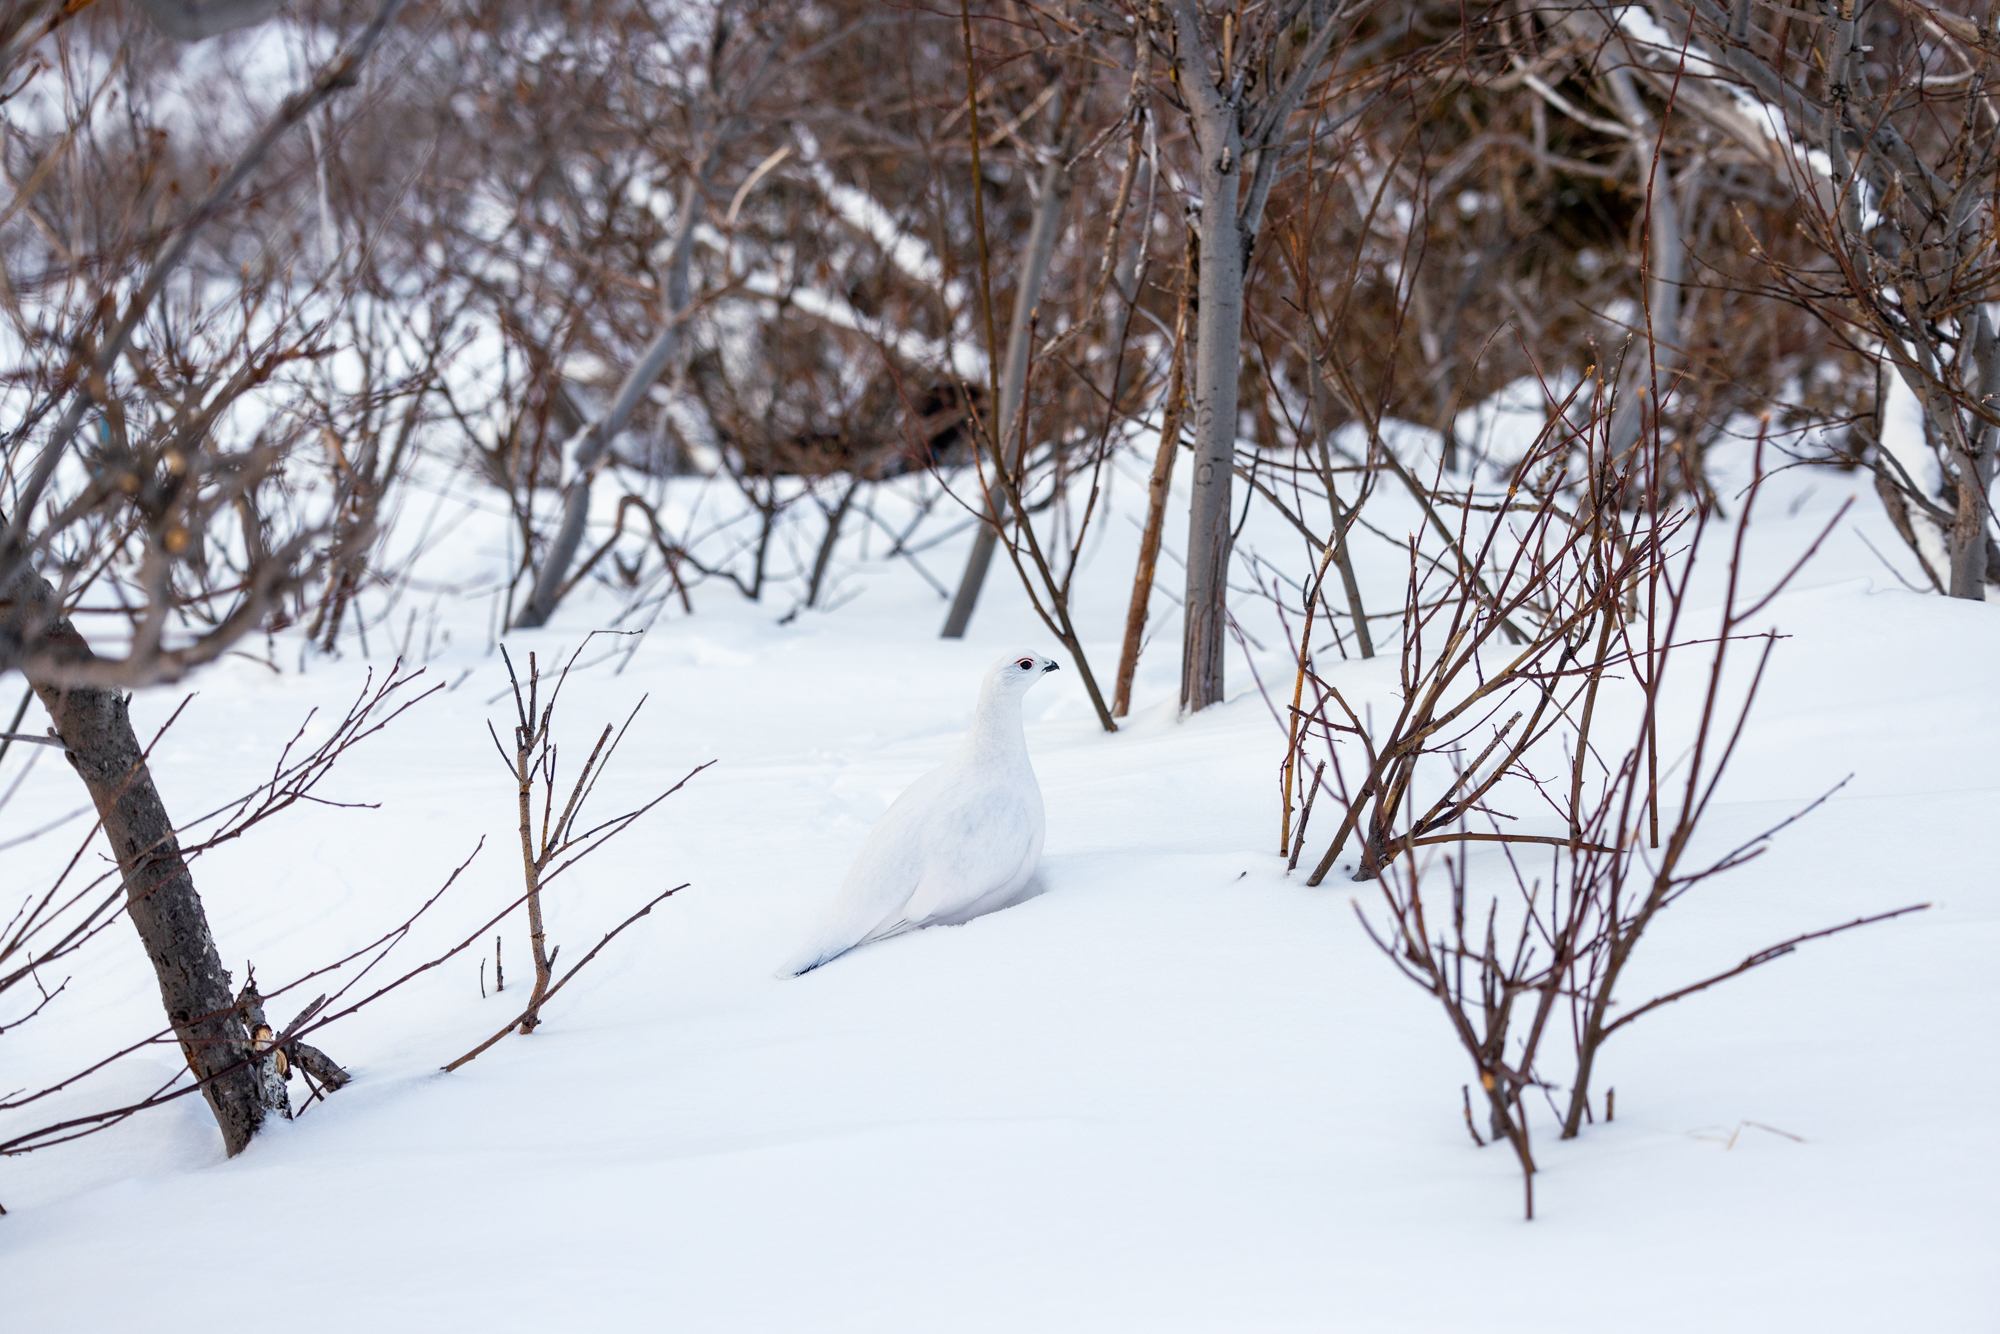 A white ptarmigan sits on white snow in the alders.